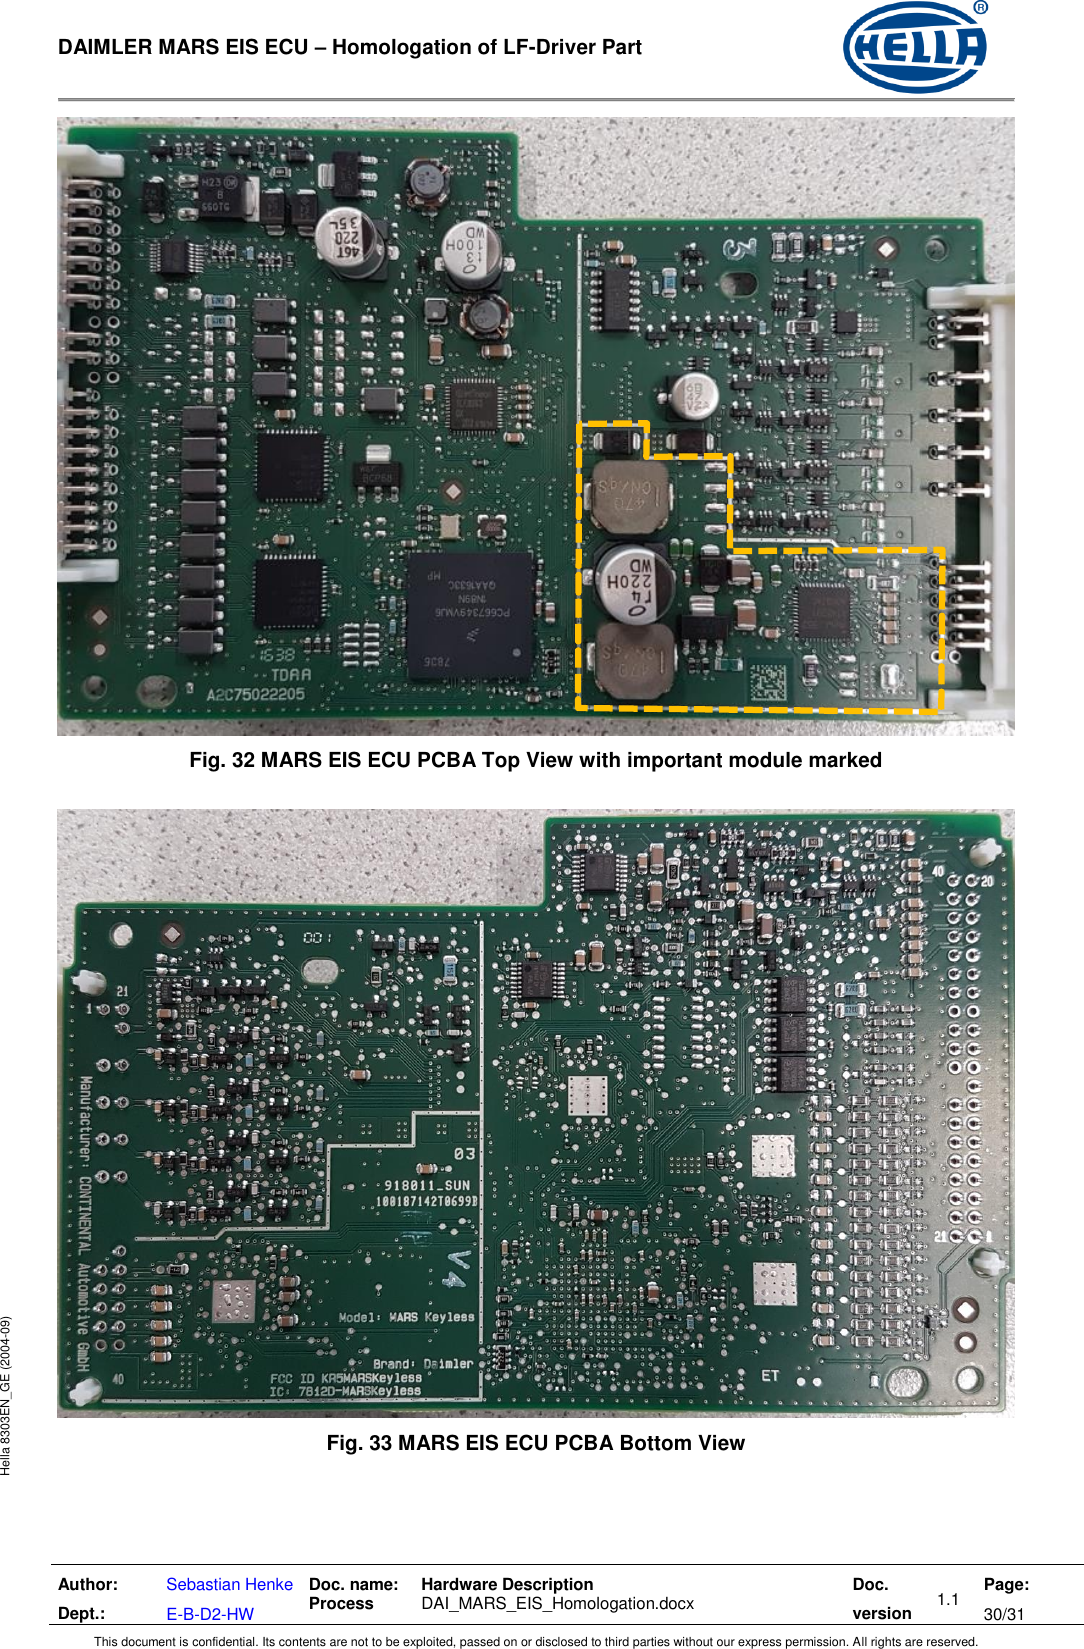  DAIMLER MARS EIS ECU – Homologation of LF-Driver Part   Author: Dept.: Sebastian Henke E-B-D2-HW Doc. name: Process Hardware Description  DAI_MARS_EIS_Homologation.docx Doc. version 1.1 Page: 30/31 This document is confidential. Its contents are not to be exploited, passed on or disclosed to third parties without our express permission. All rights are reserved. Hella 8303EN_GE (2004-09)  Fig. 32 MARS EIS ECU PCBA Top View with important module marked   Fig. 33 MARS EIS ECU PCBA Bottom View  